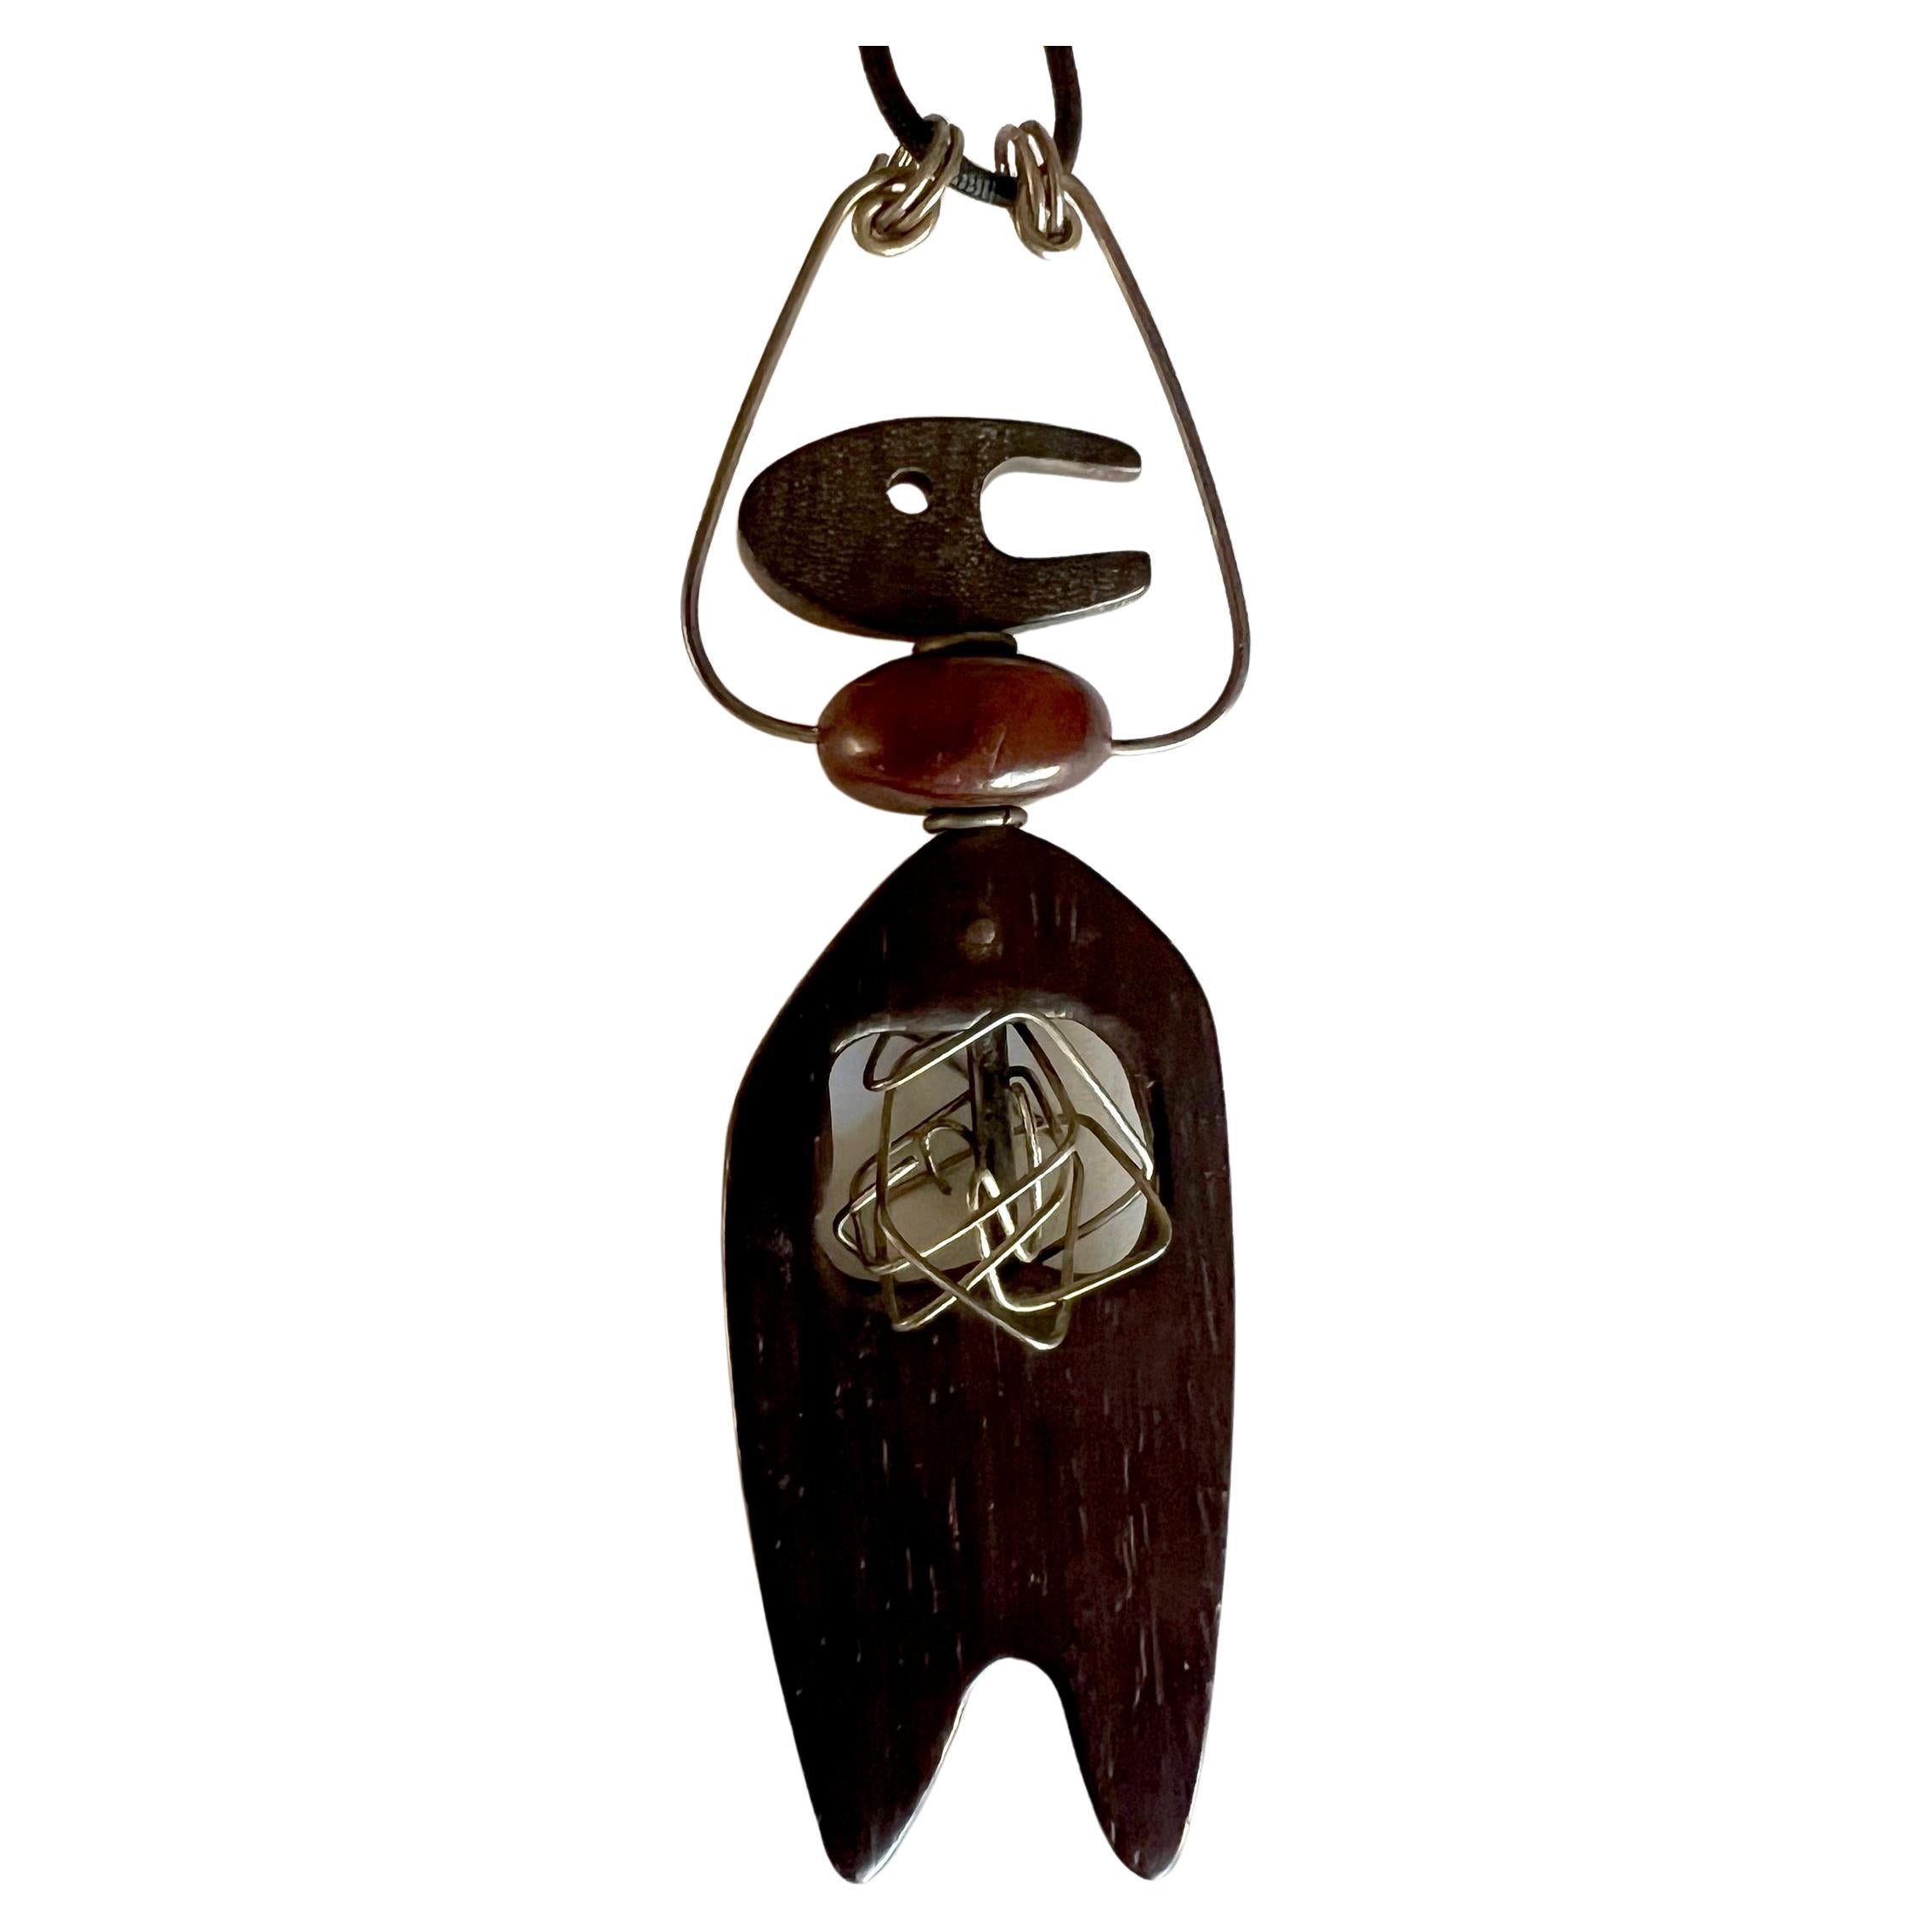 Milton Cavagnaro California Abstract Modernist Wooden Man Pendant on Cord For Sale 1